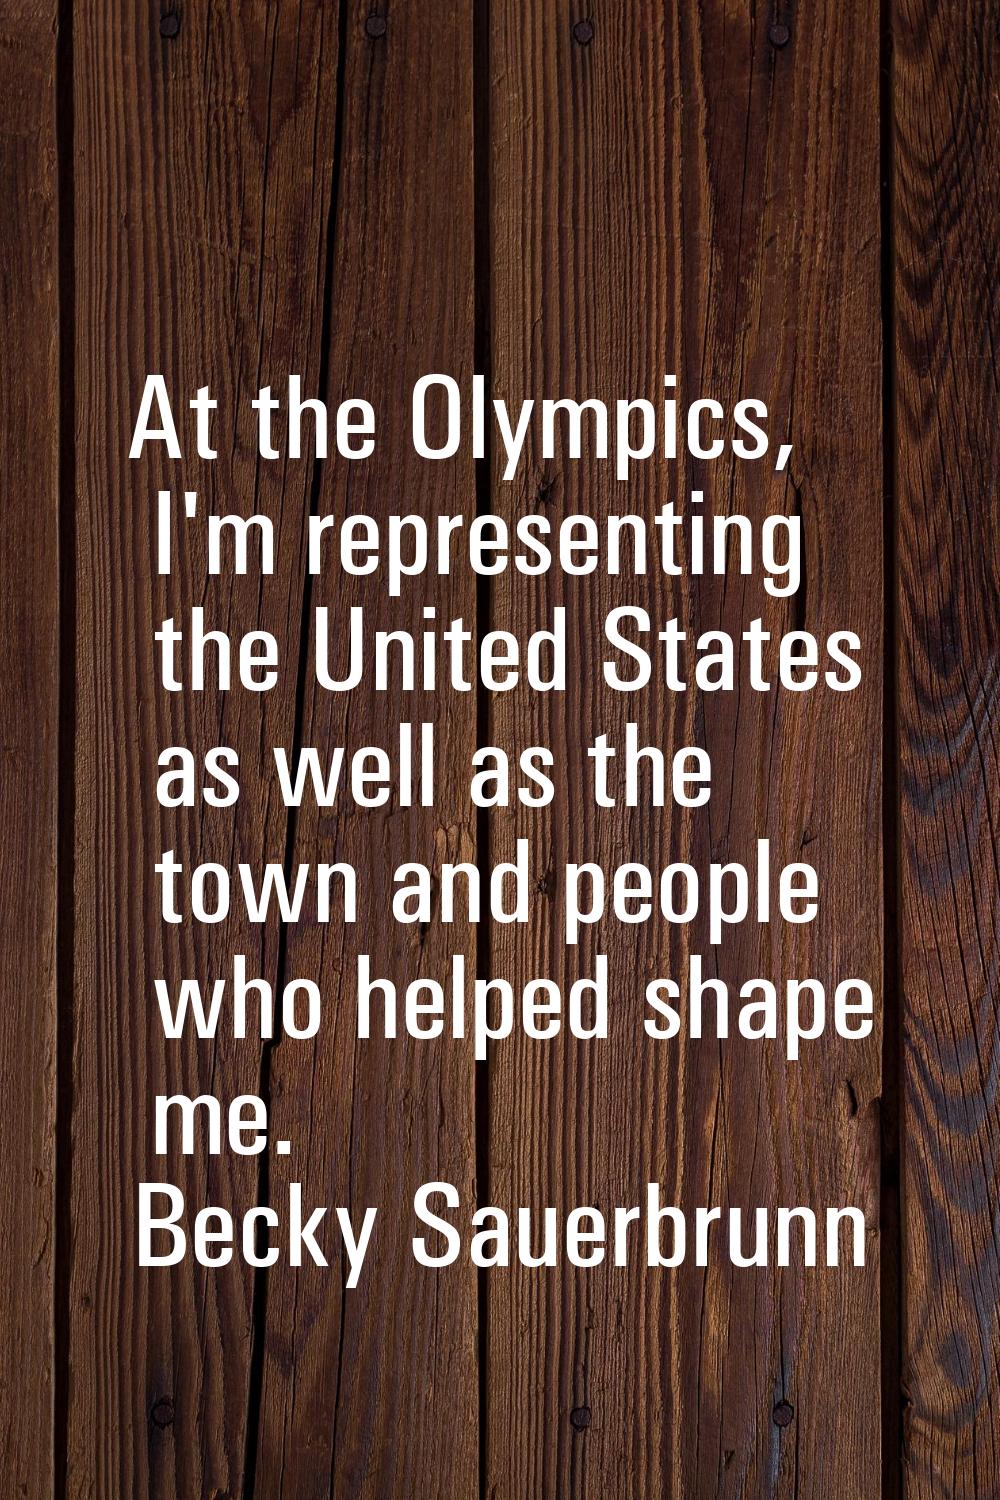 At the Olympics, I'm representing the United States as well as the town and people who helped shape